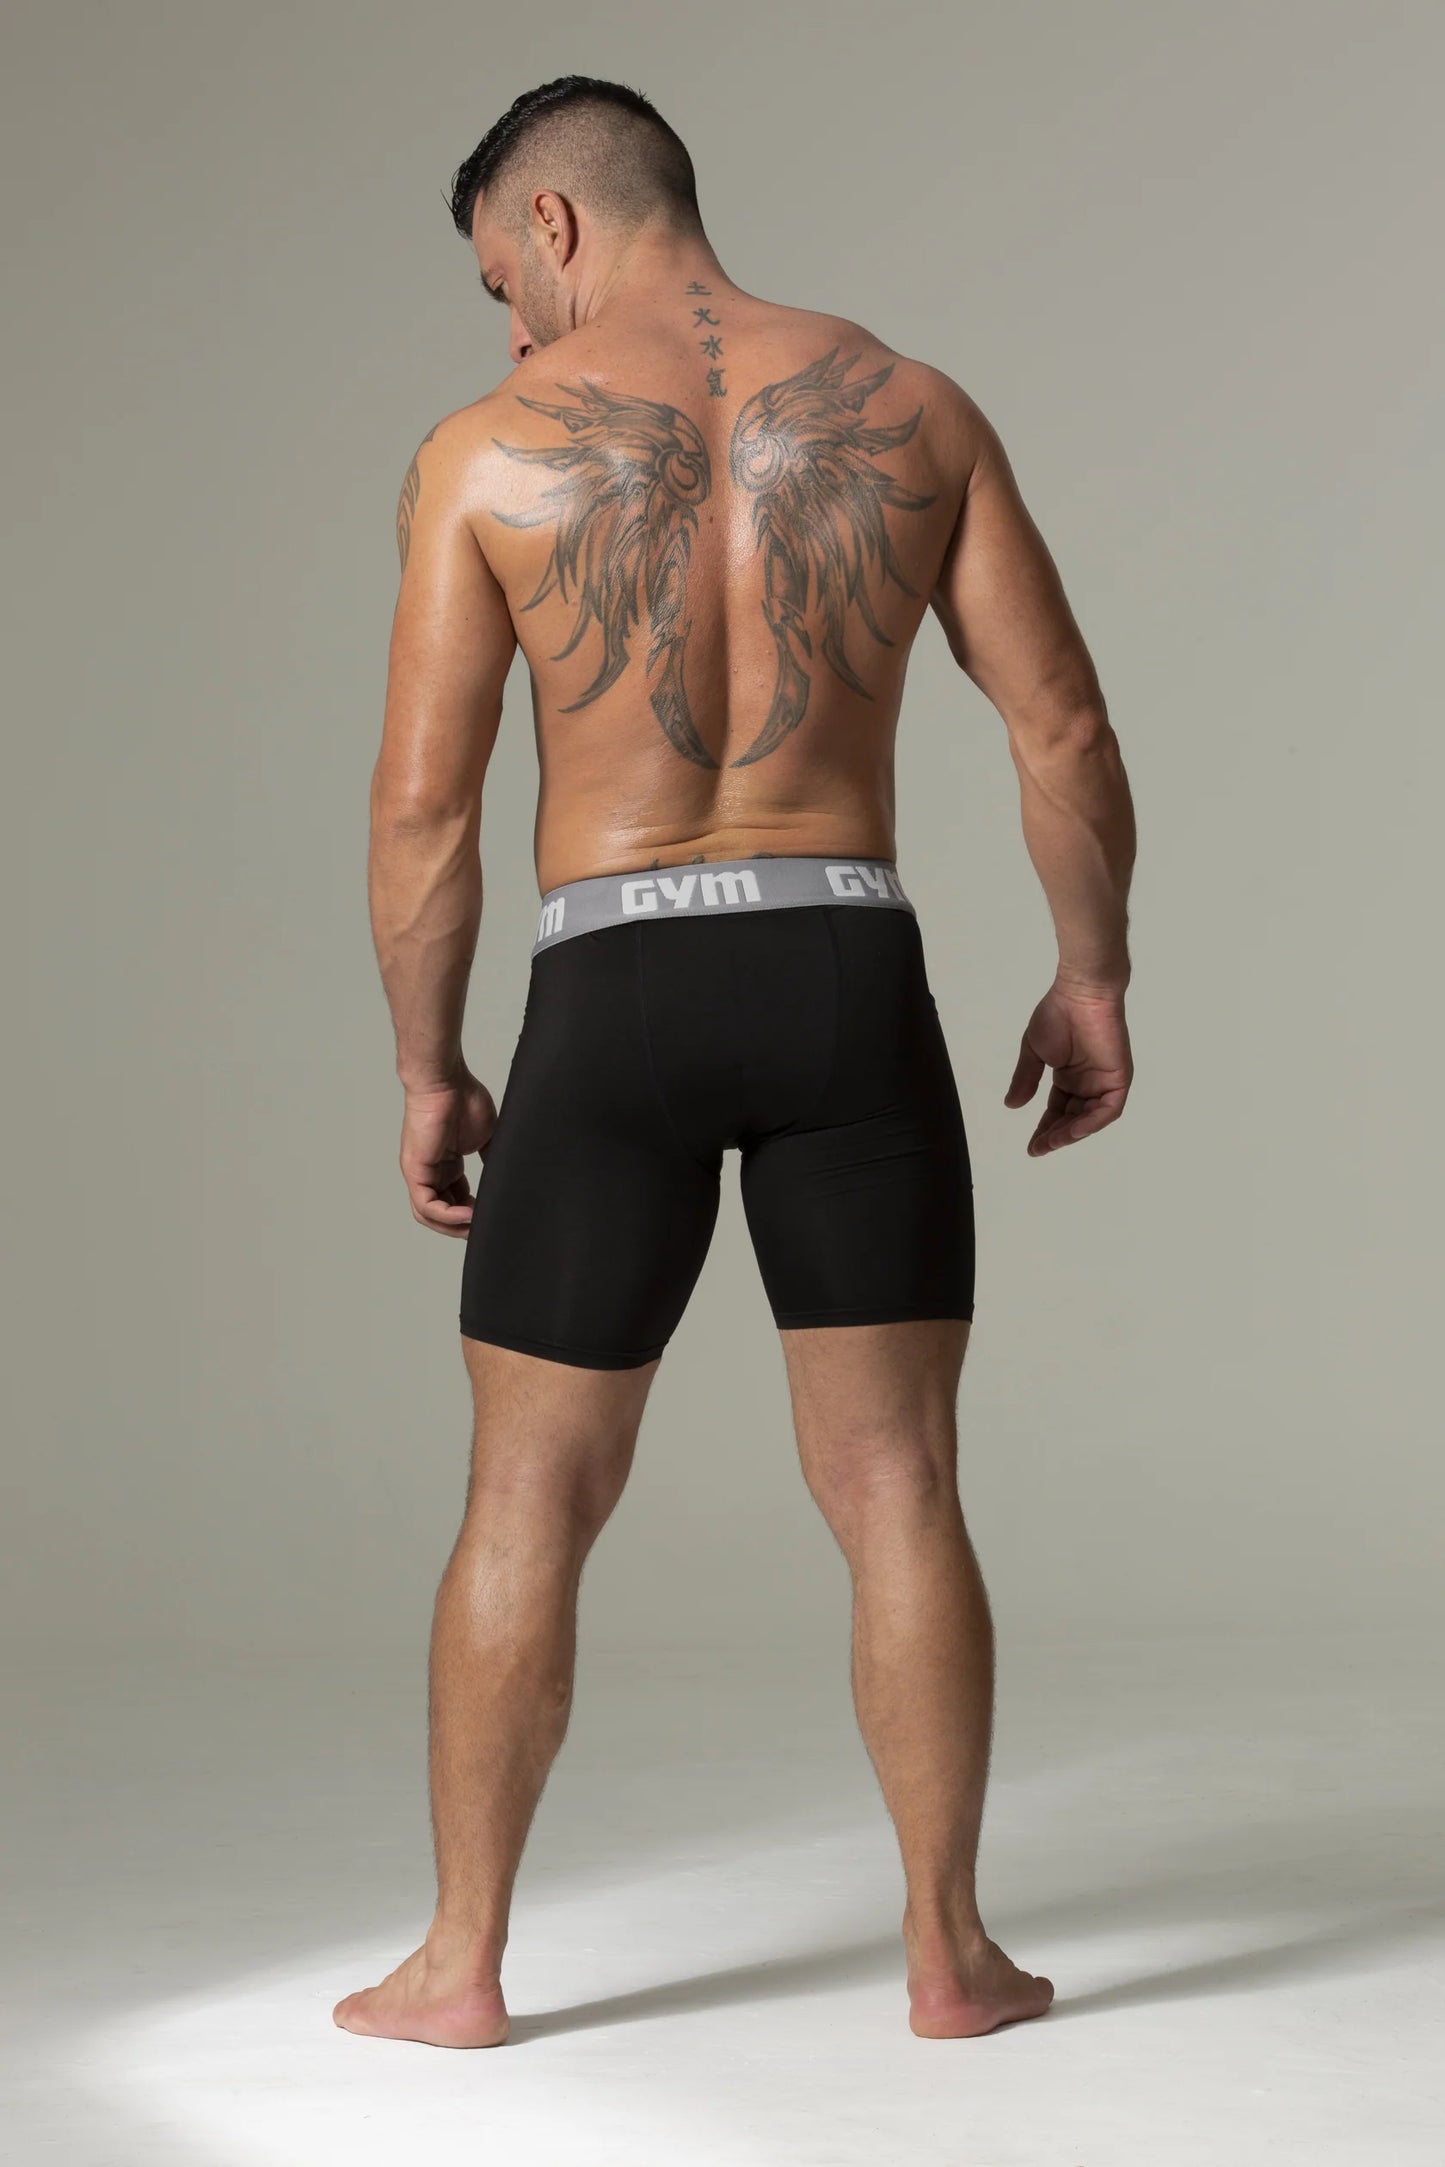 GYM Compression Shorts with Small Phone Pocket